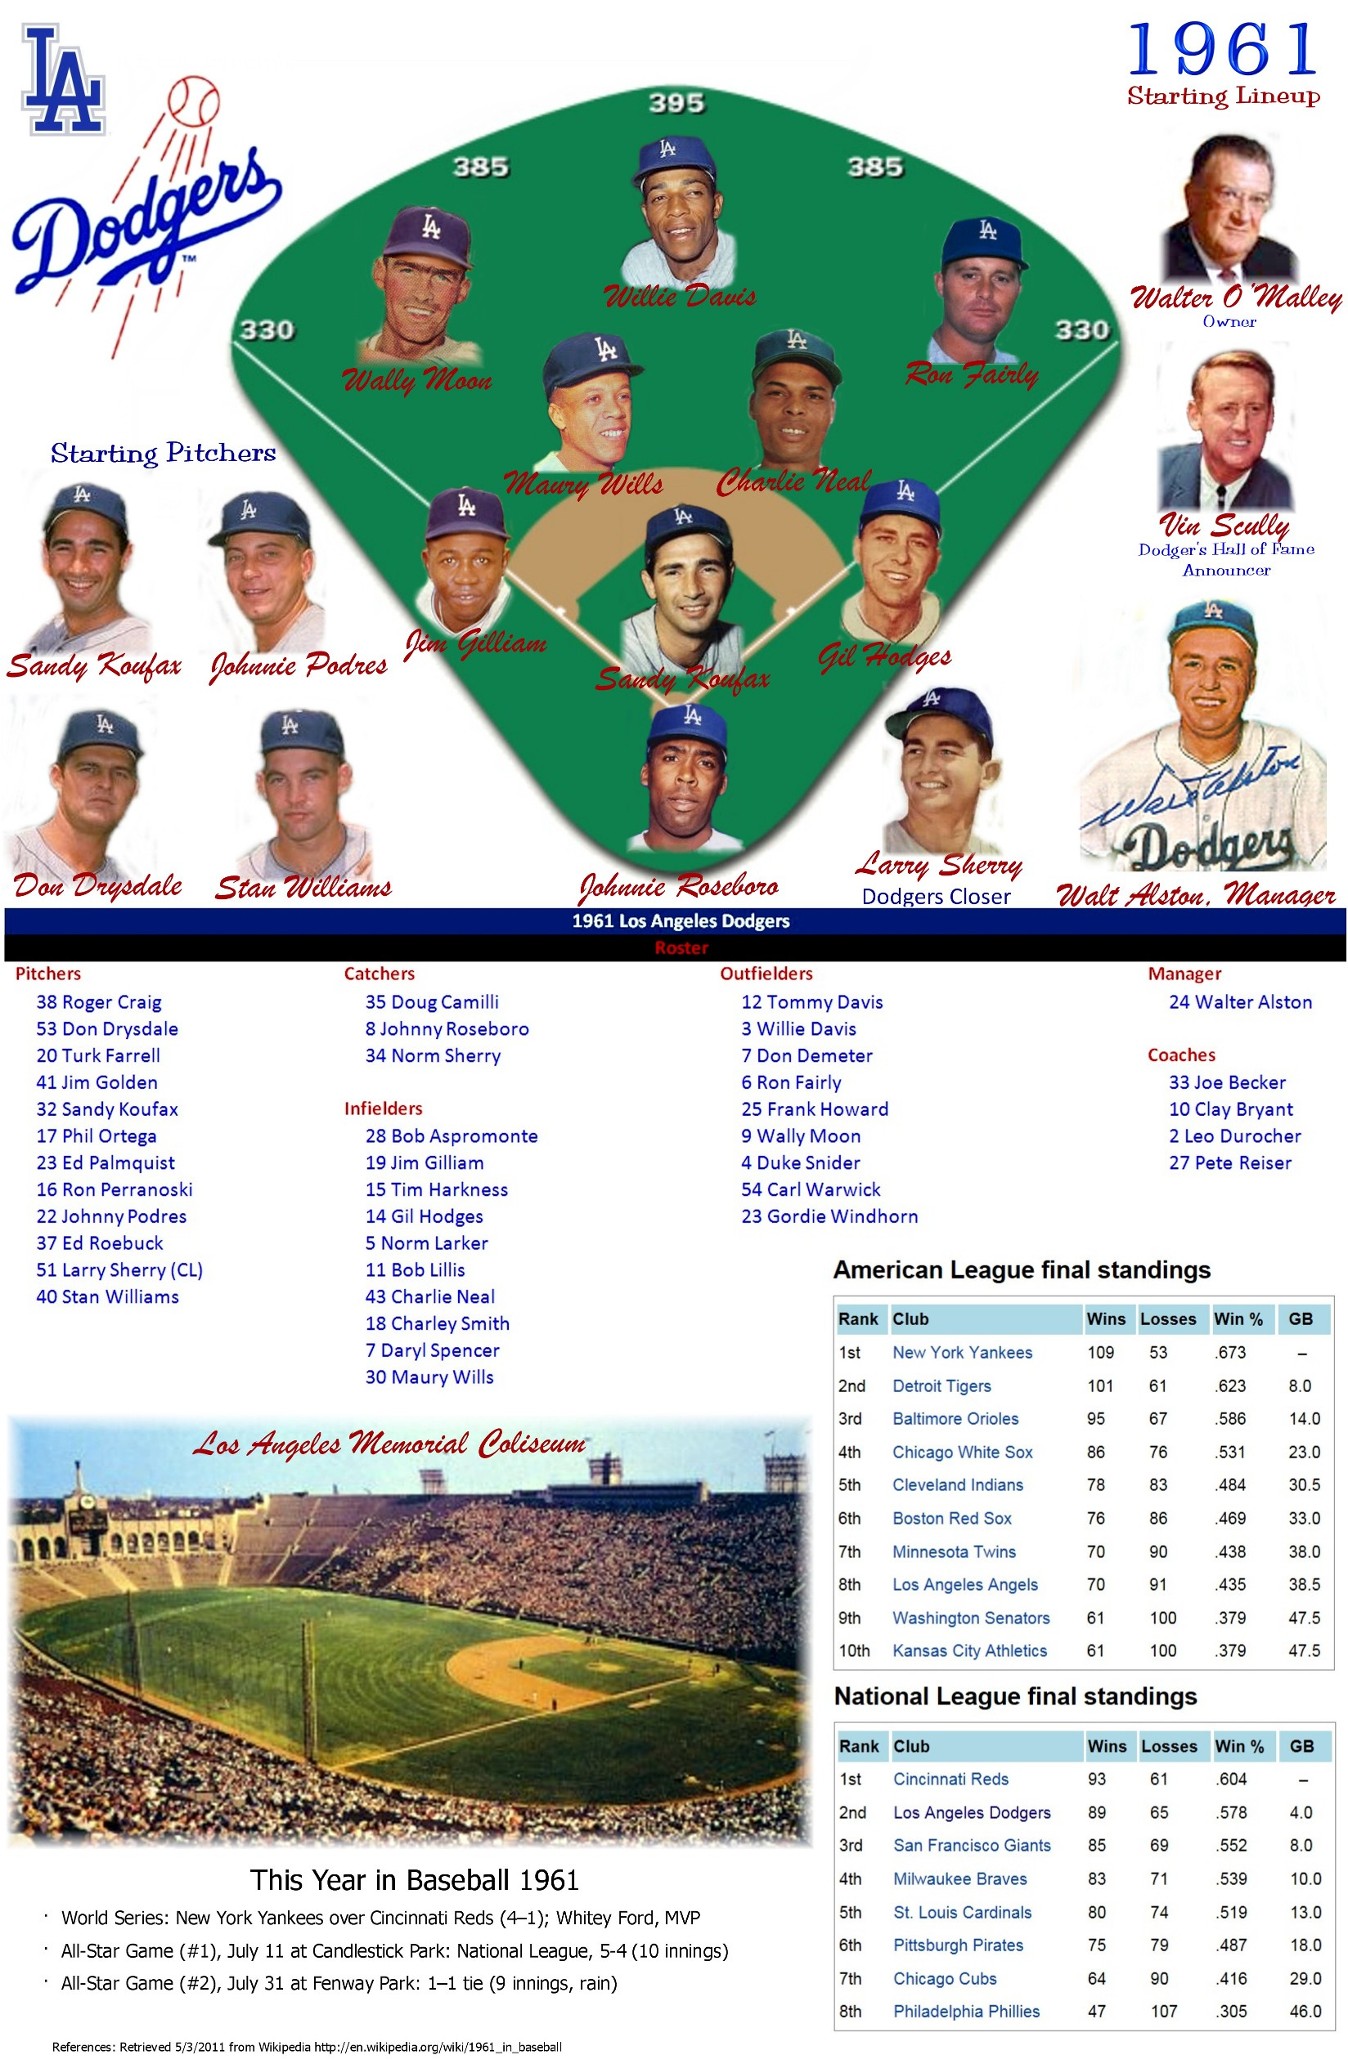 1961 Roster